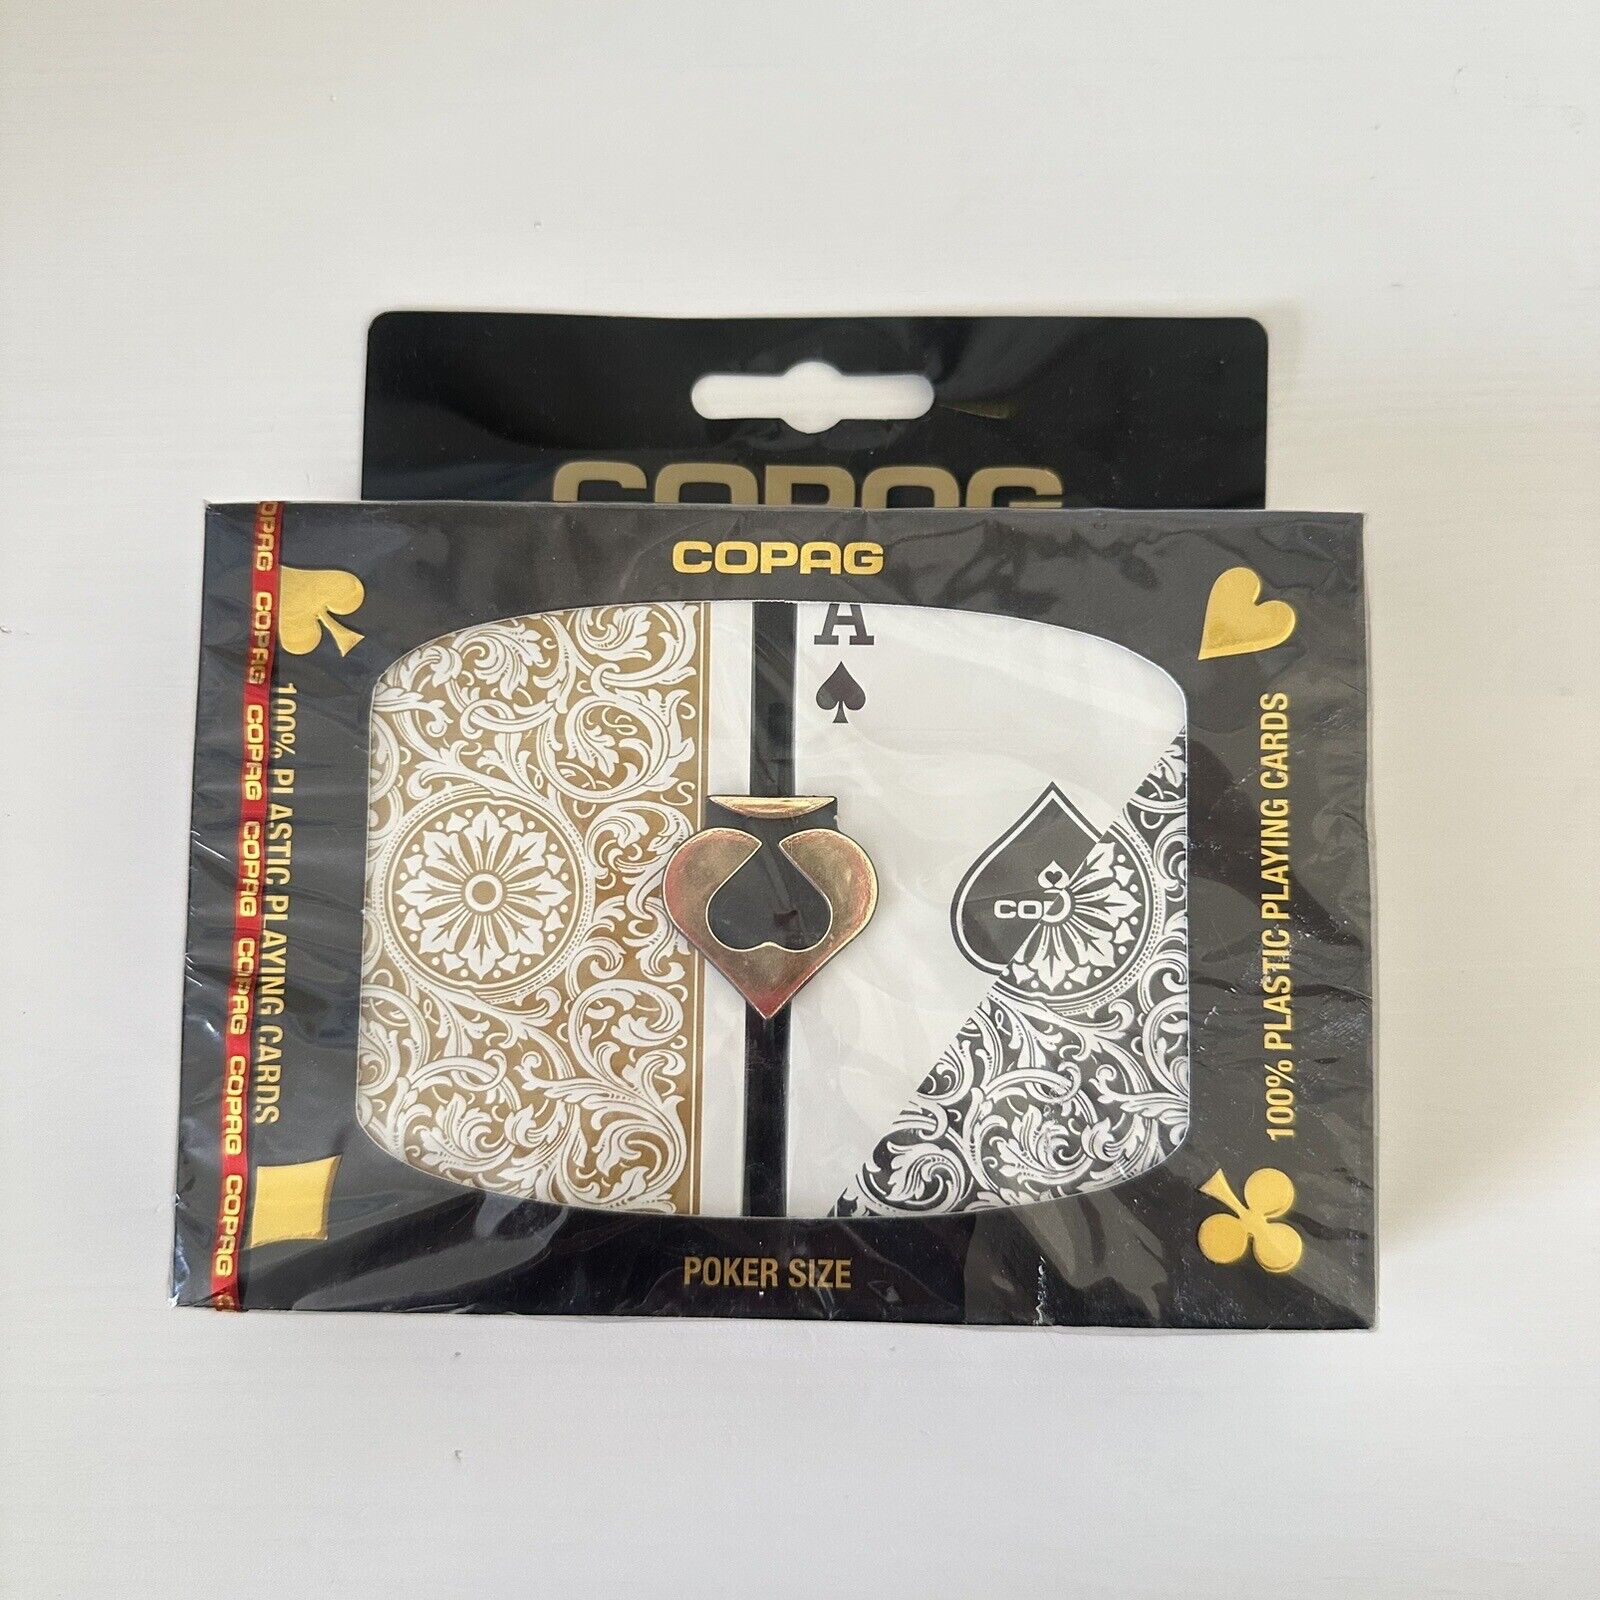 New COPAG 100% Plastic Playing Cards Poker Size Black Gold Free cut